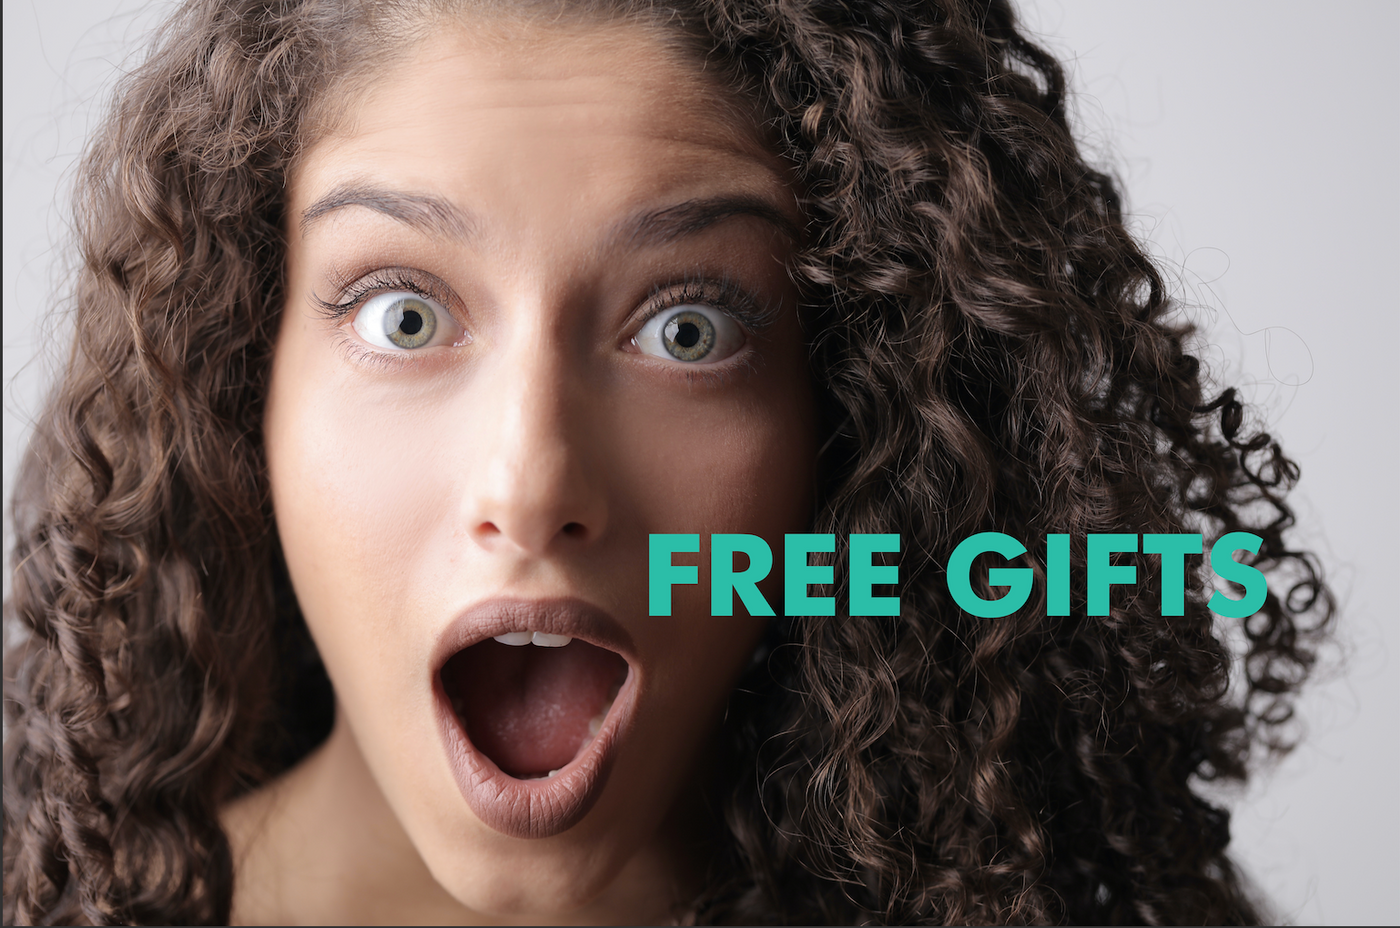 Free thoughtful gifts